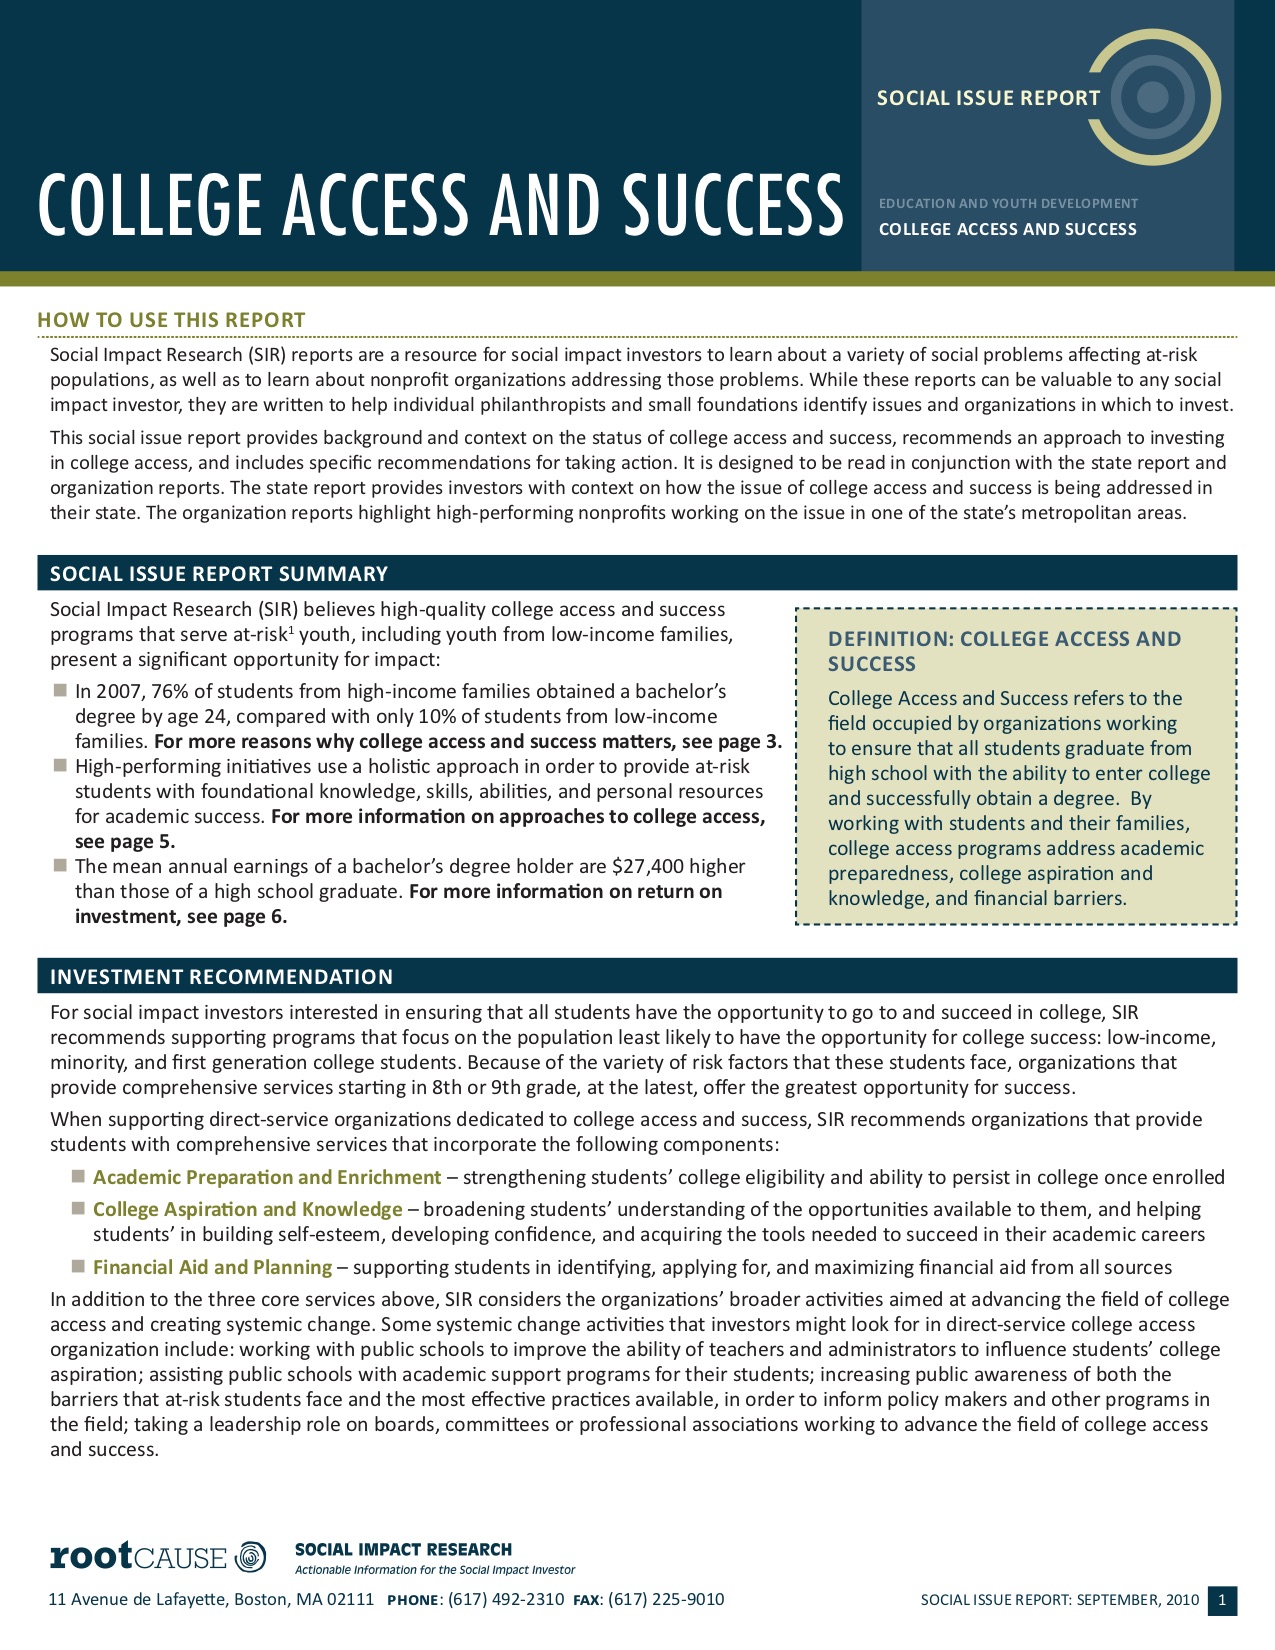 College Access and Success: Social Issue Report